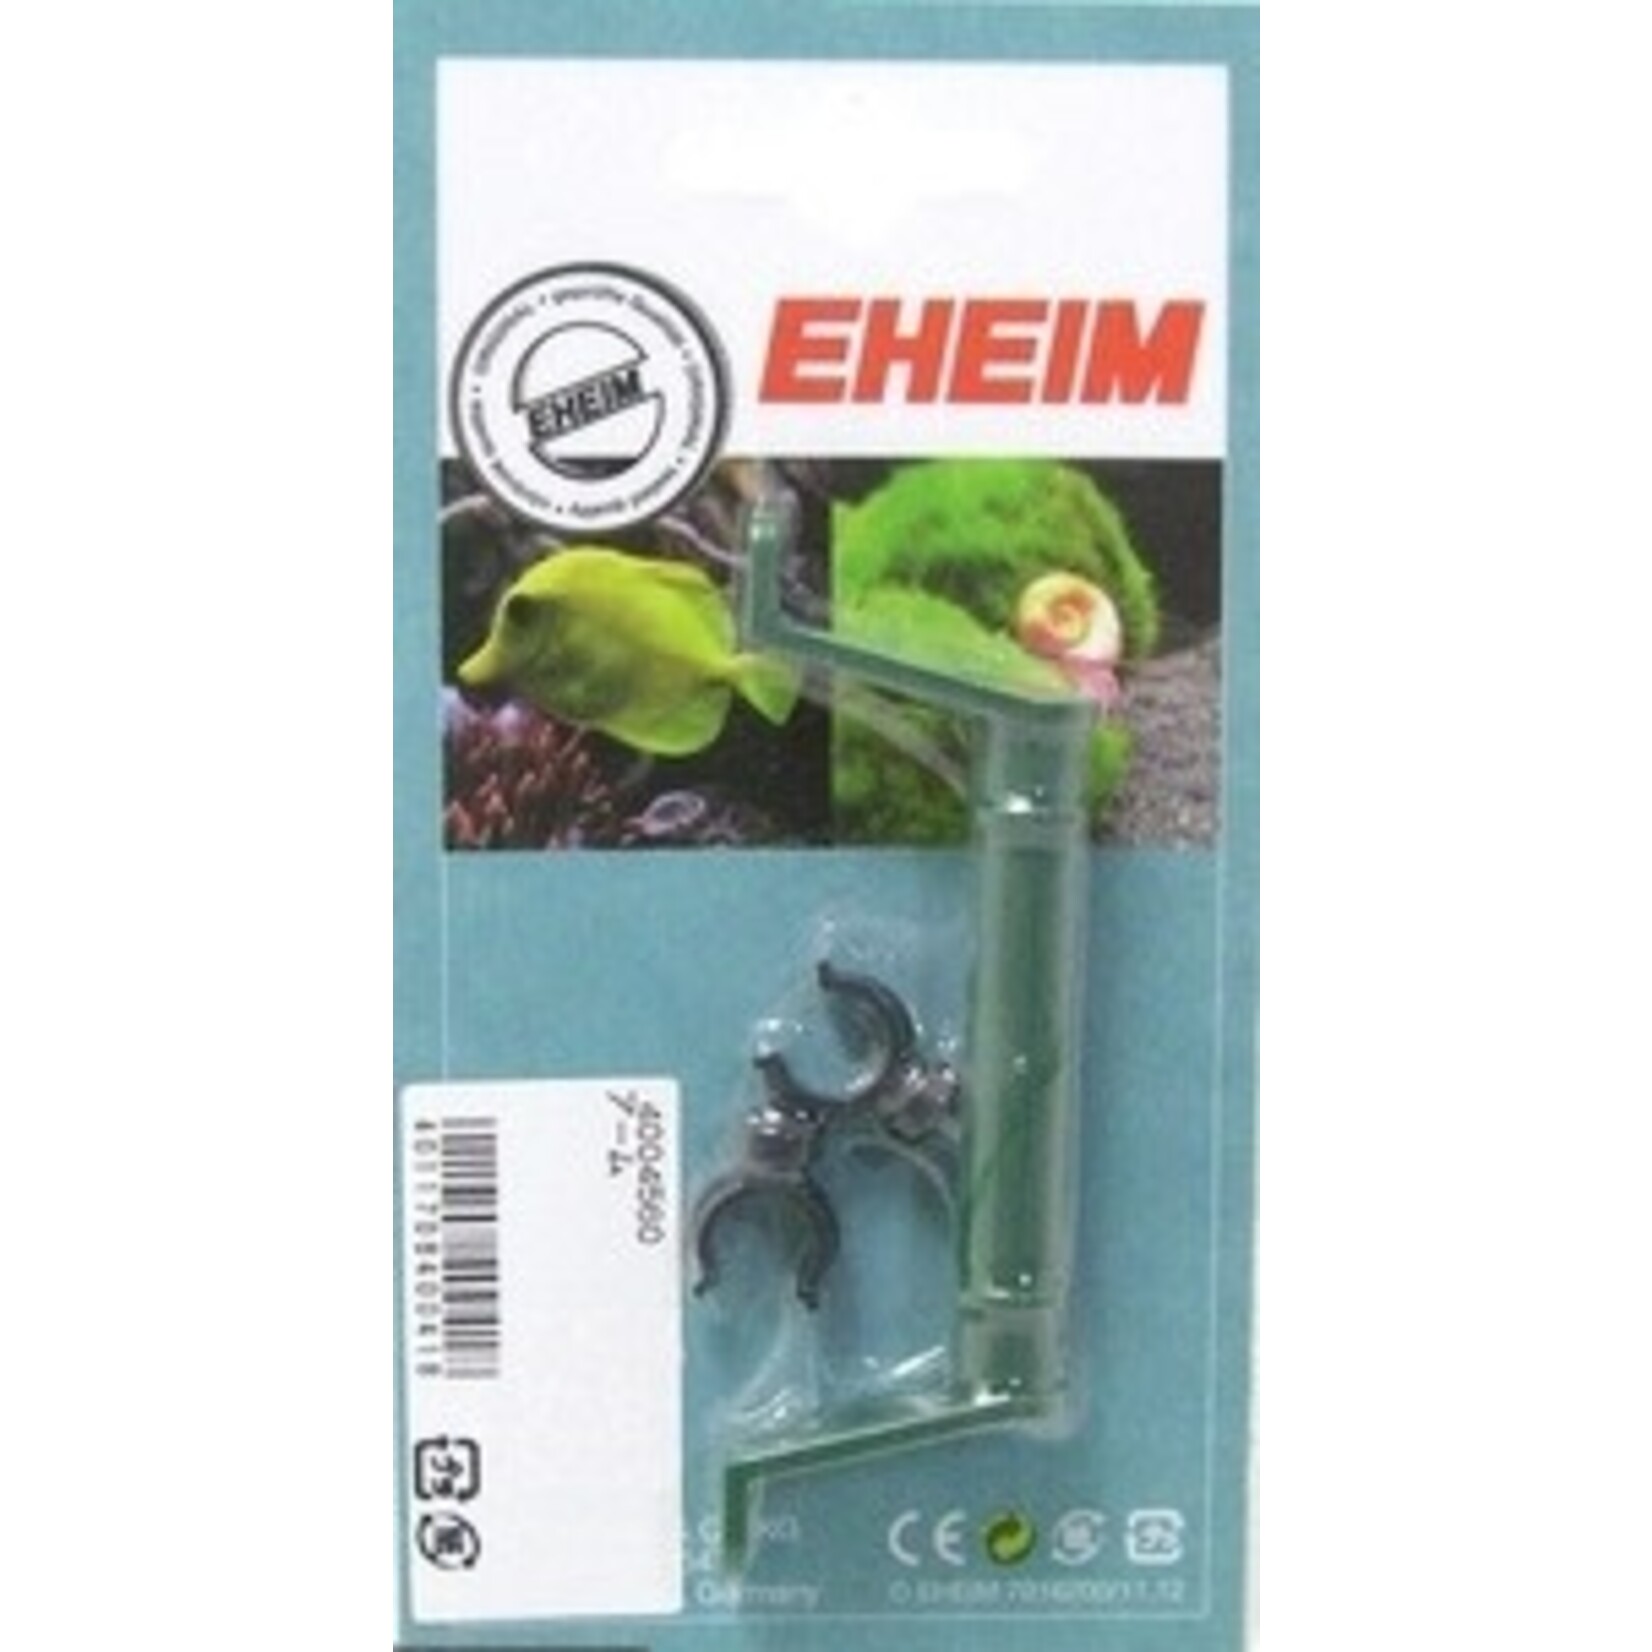 Eheim spacer for 3535 and 4004620